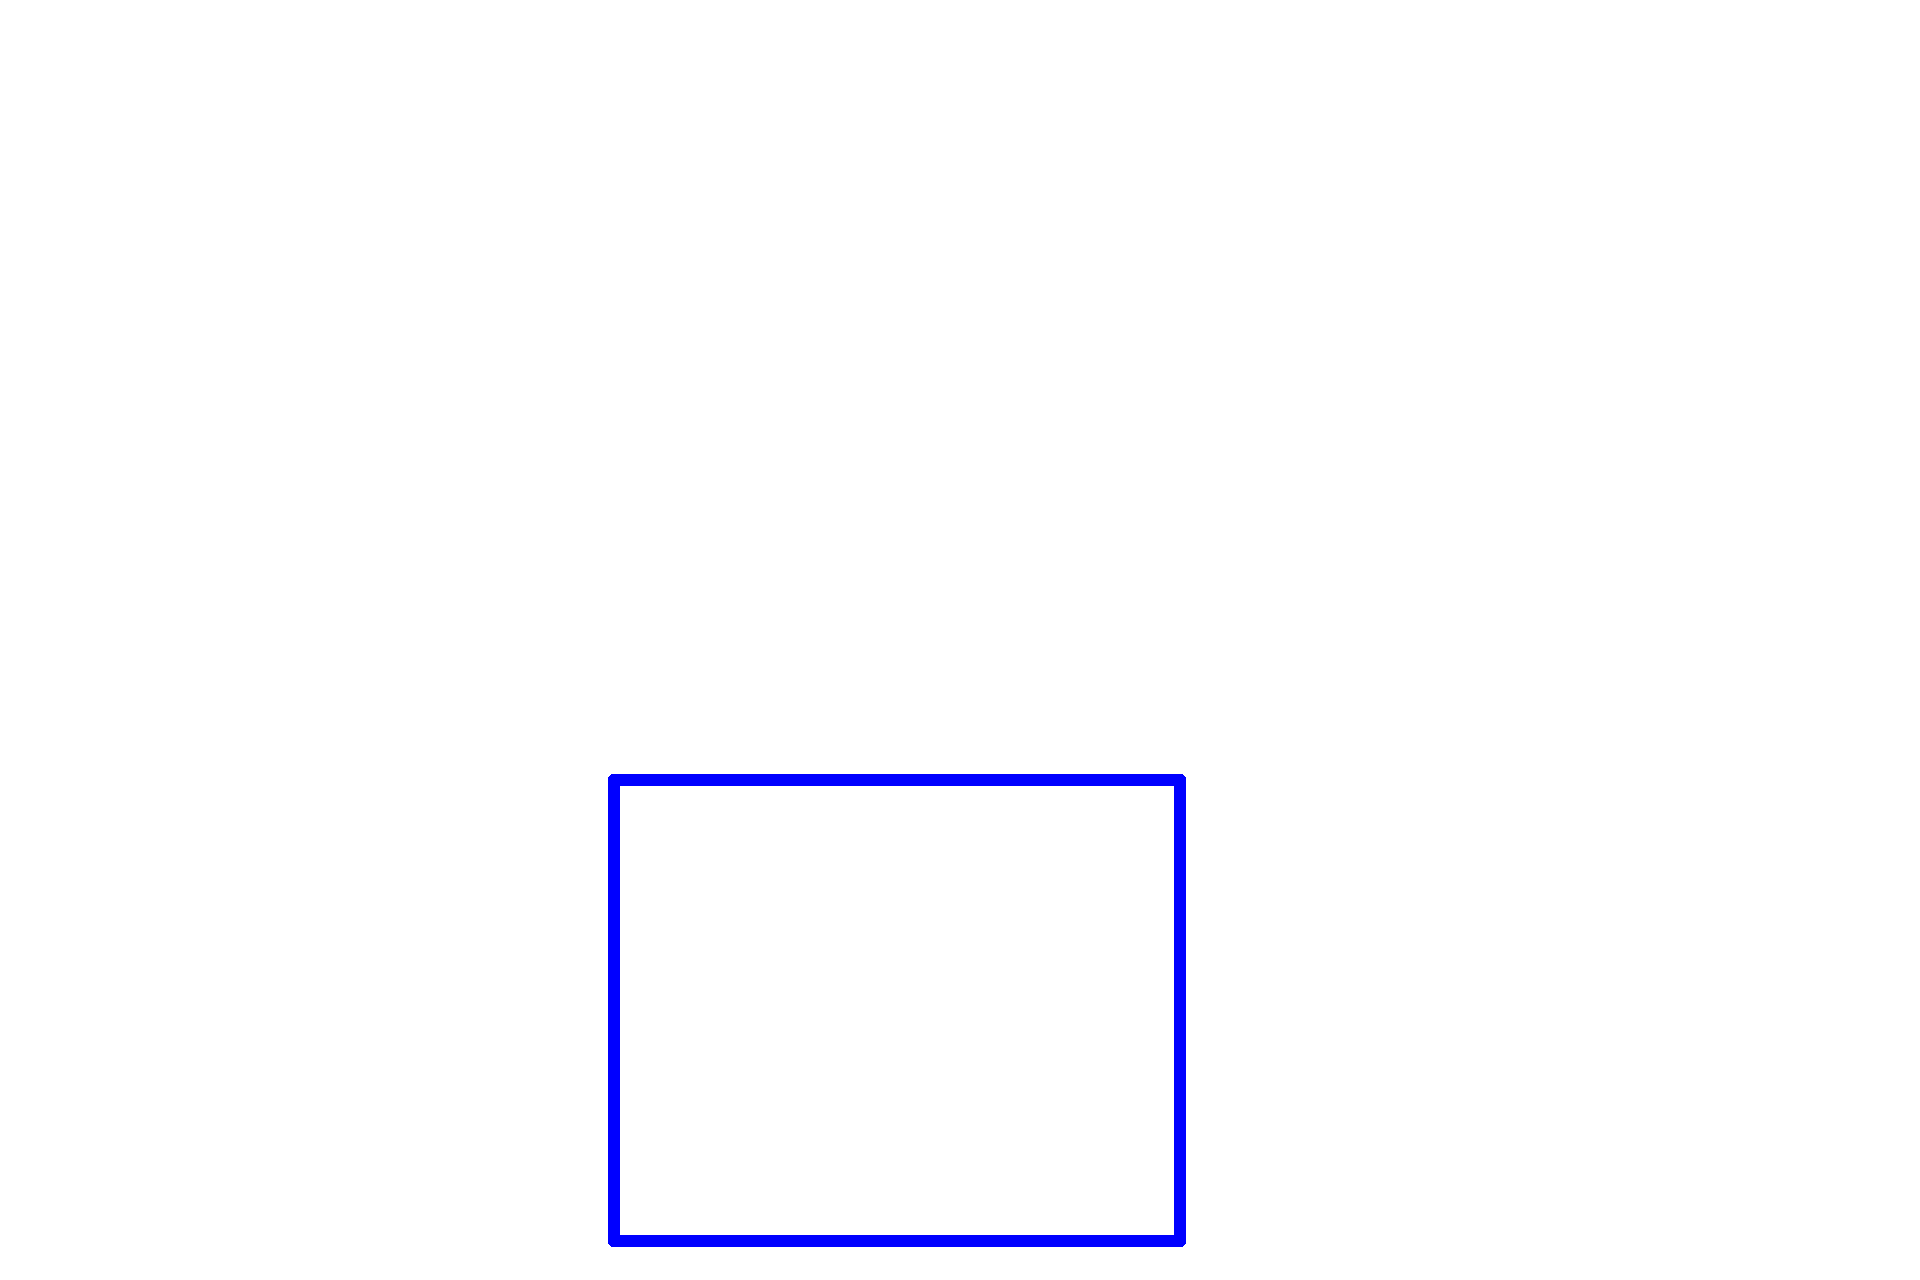 Area shown in next image <p>This area is shown at higher magnification in the next image.</p>
